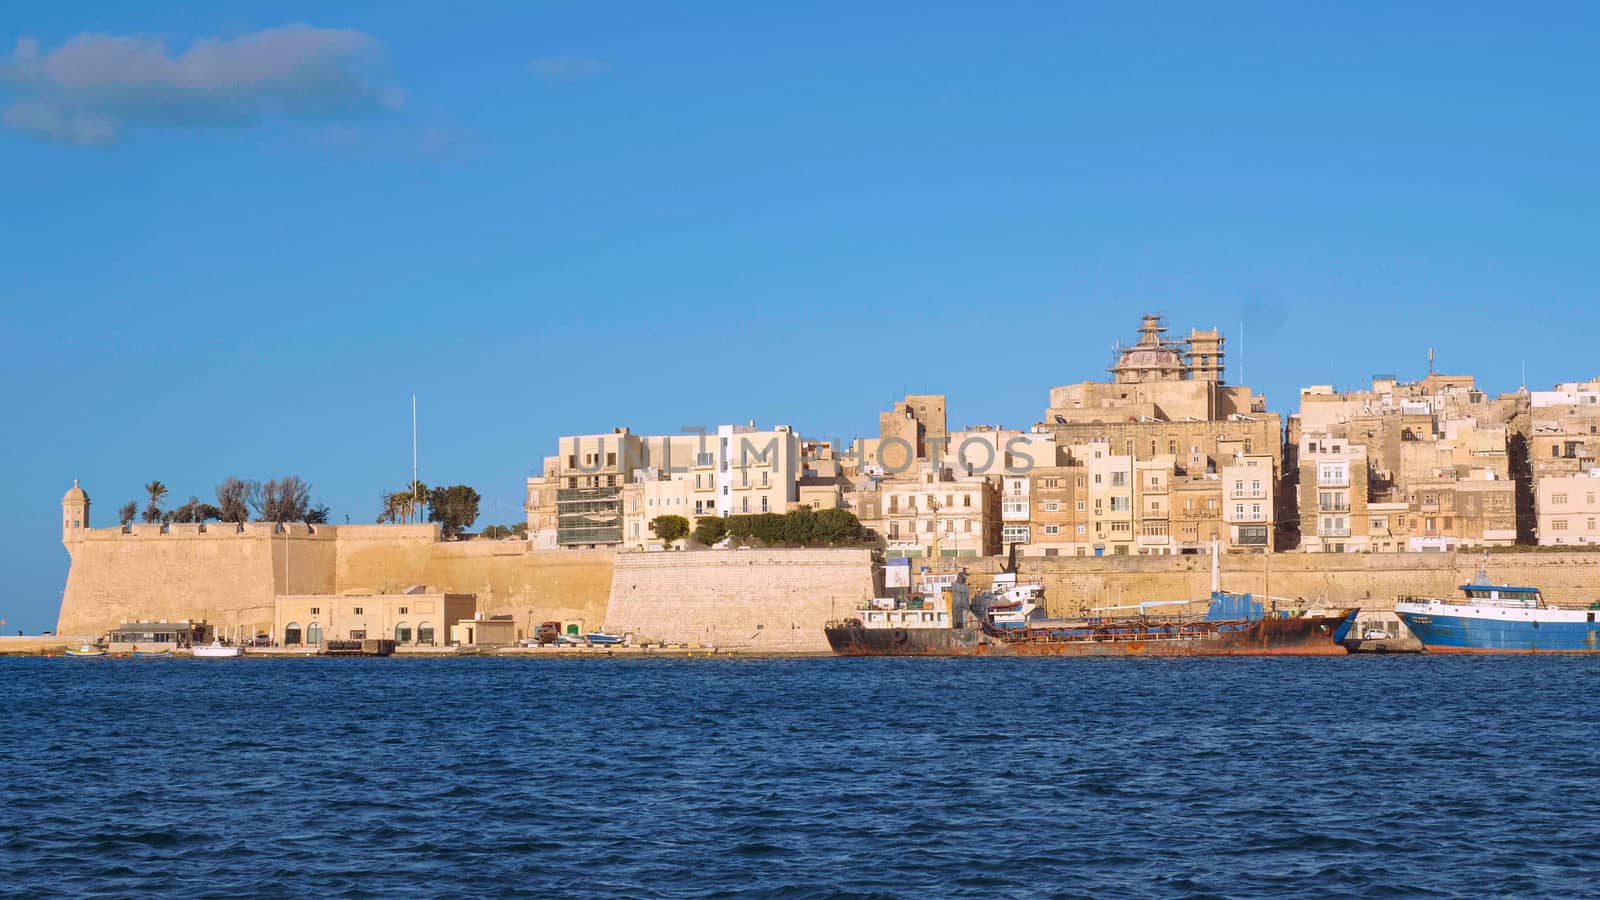 Boat trip along the port of Valletta in Malta - travel photography